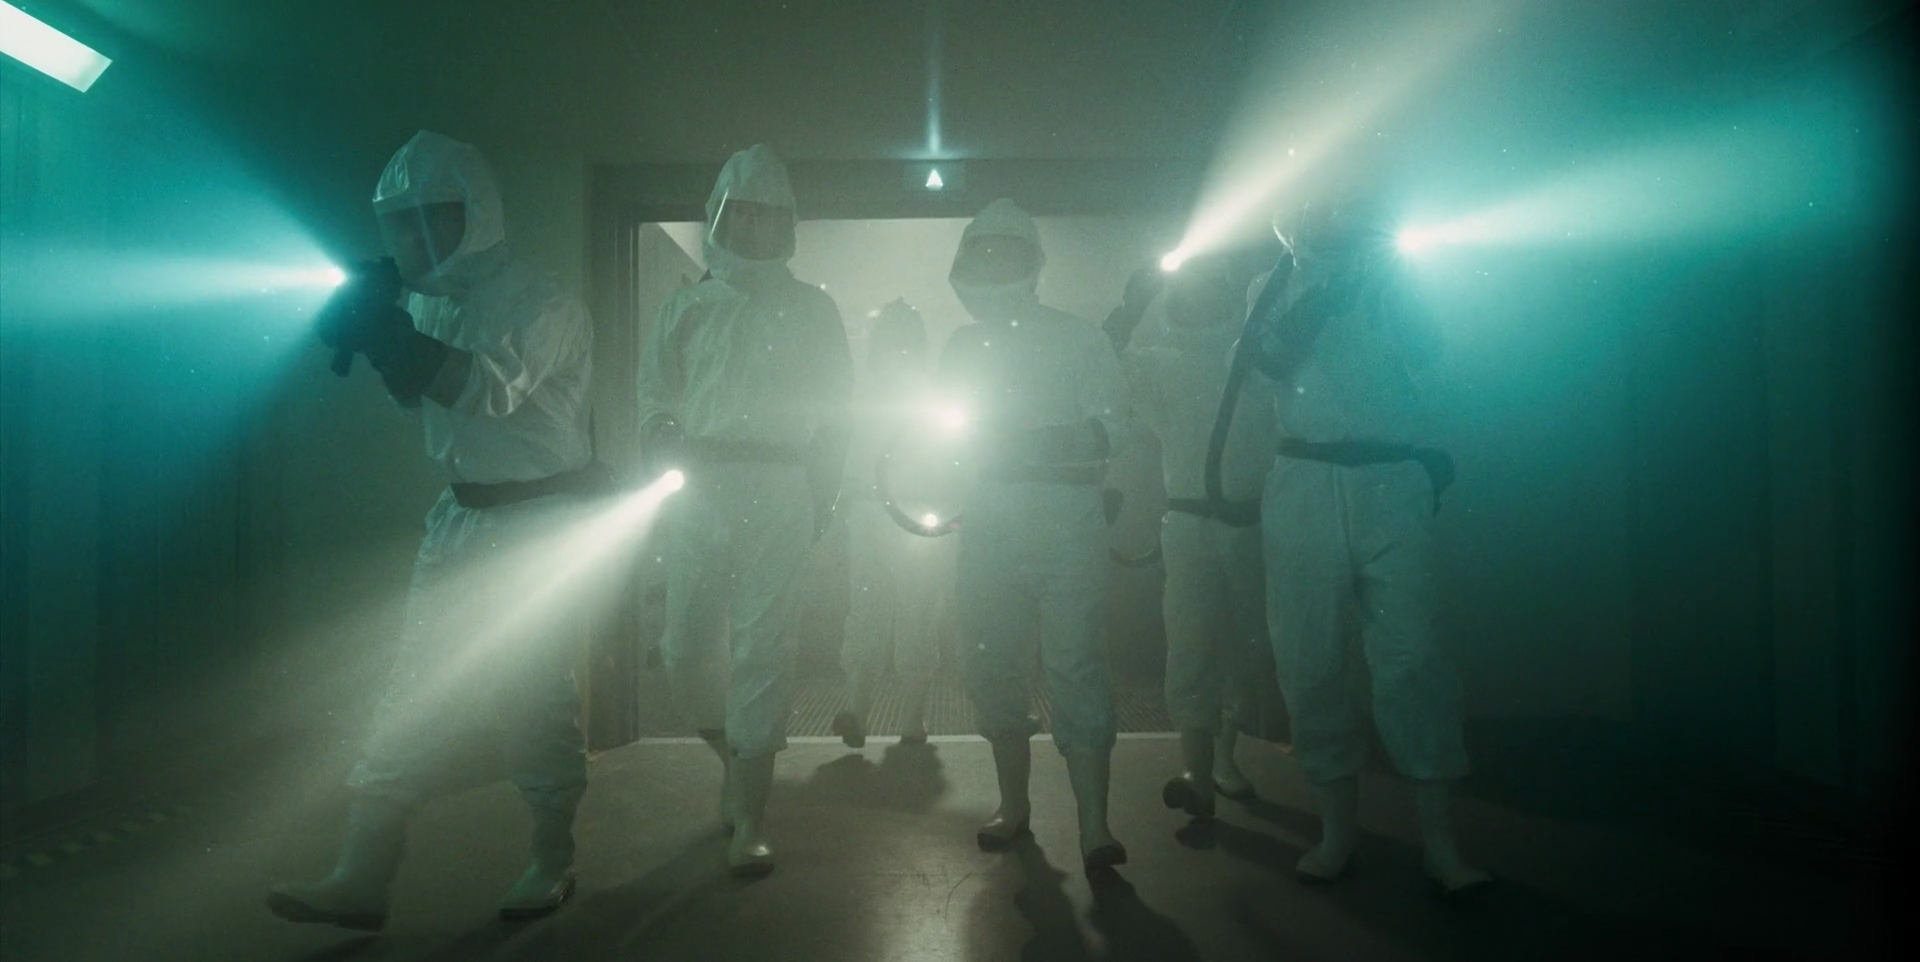 Scientists from the U.S. Department of Energy in STRANGER THINGS (2016)